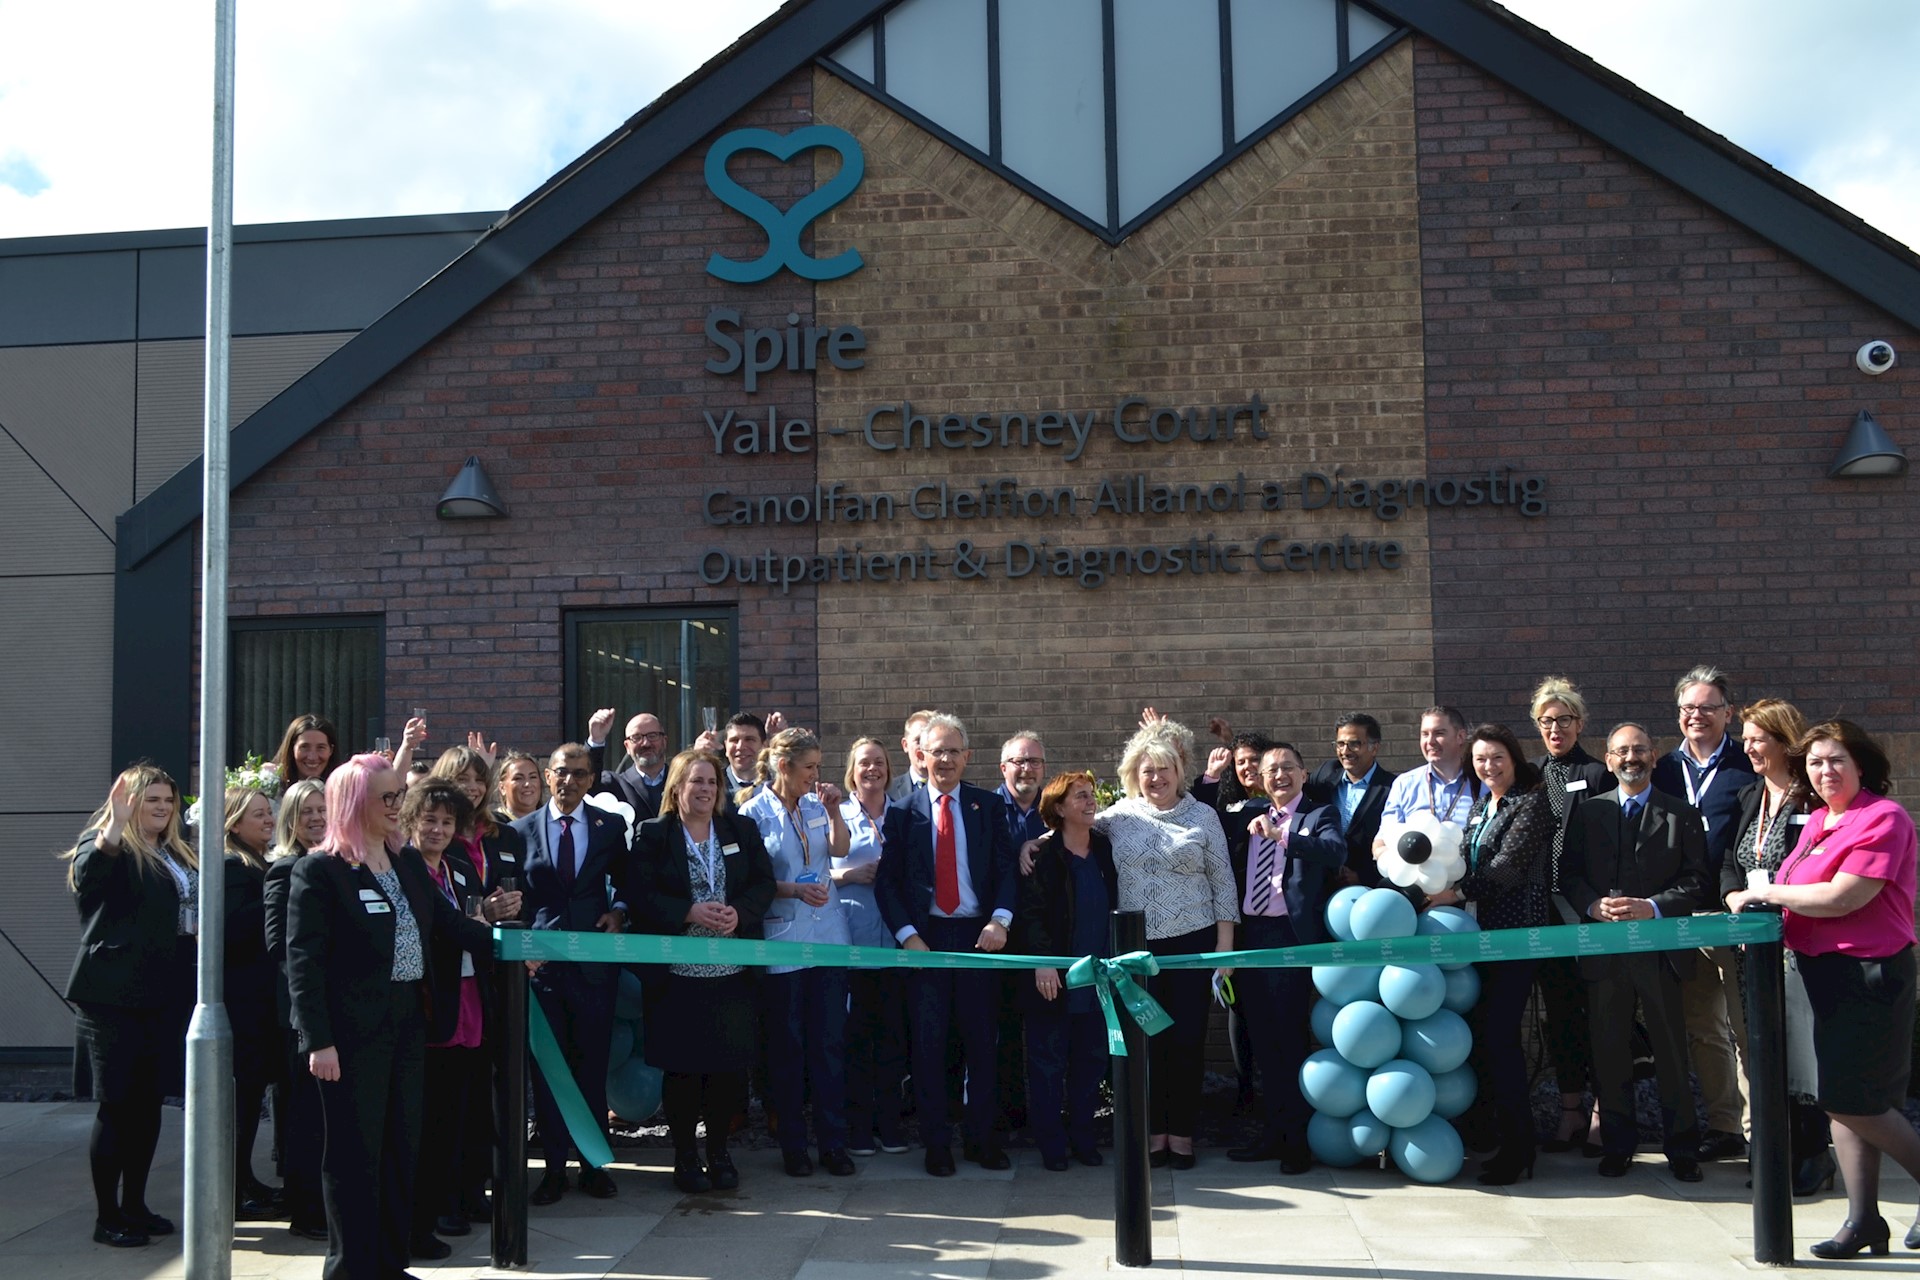 New outpatient and diagnostic centre opened at Spire Yale in Wrexham